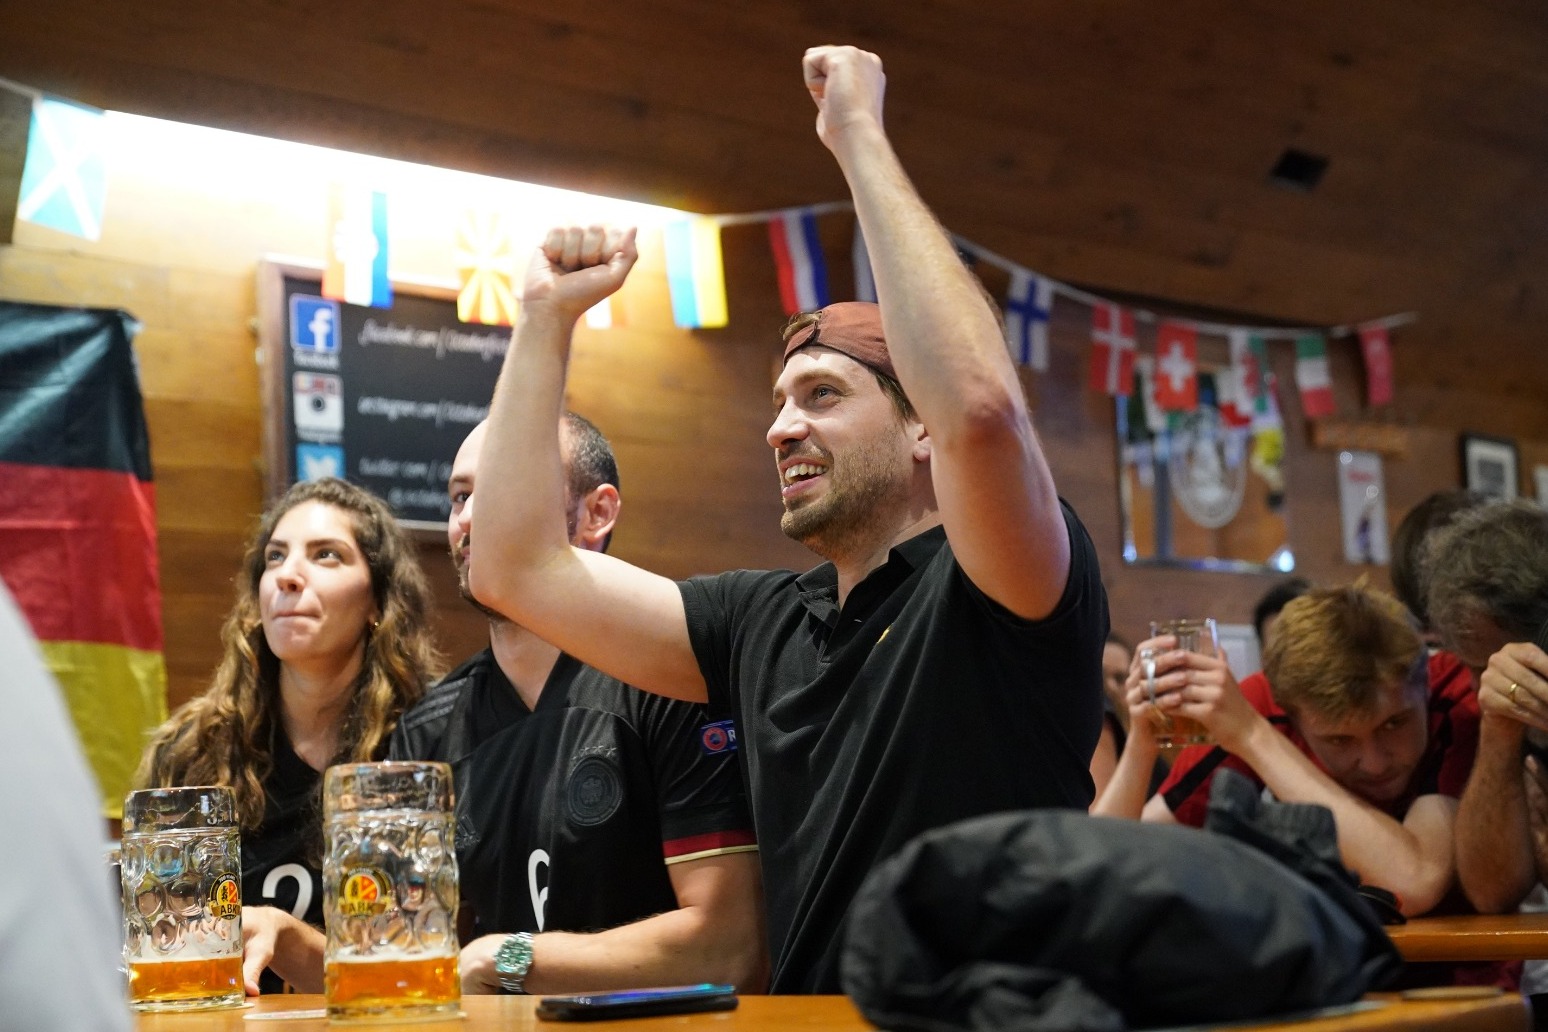 Pubs ‘to lose £5m in sales during England v Ukraine due to Covid restrictions’ 